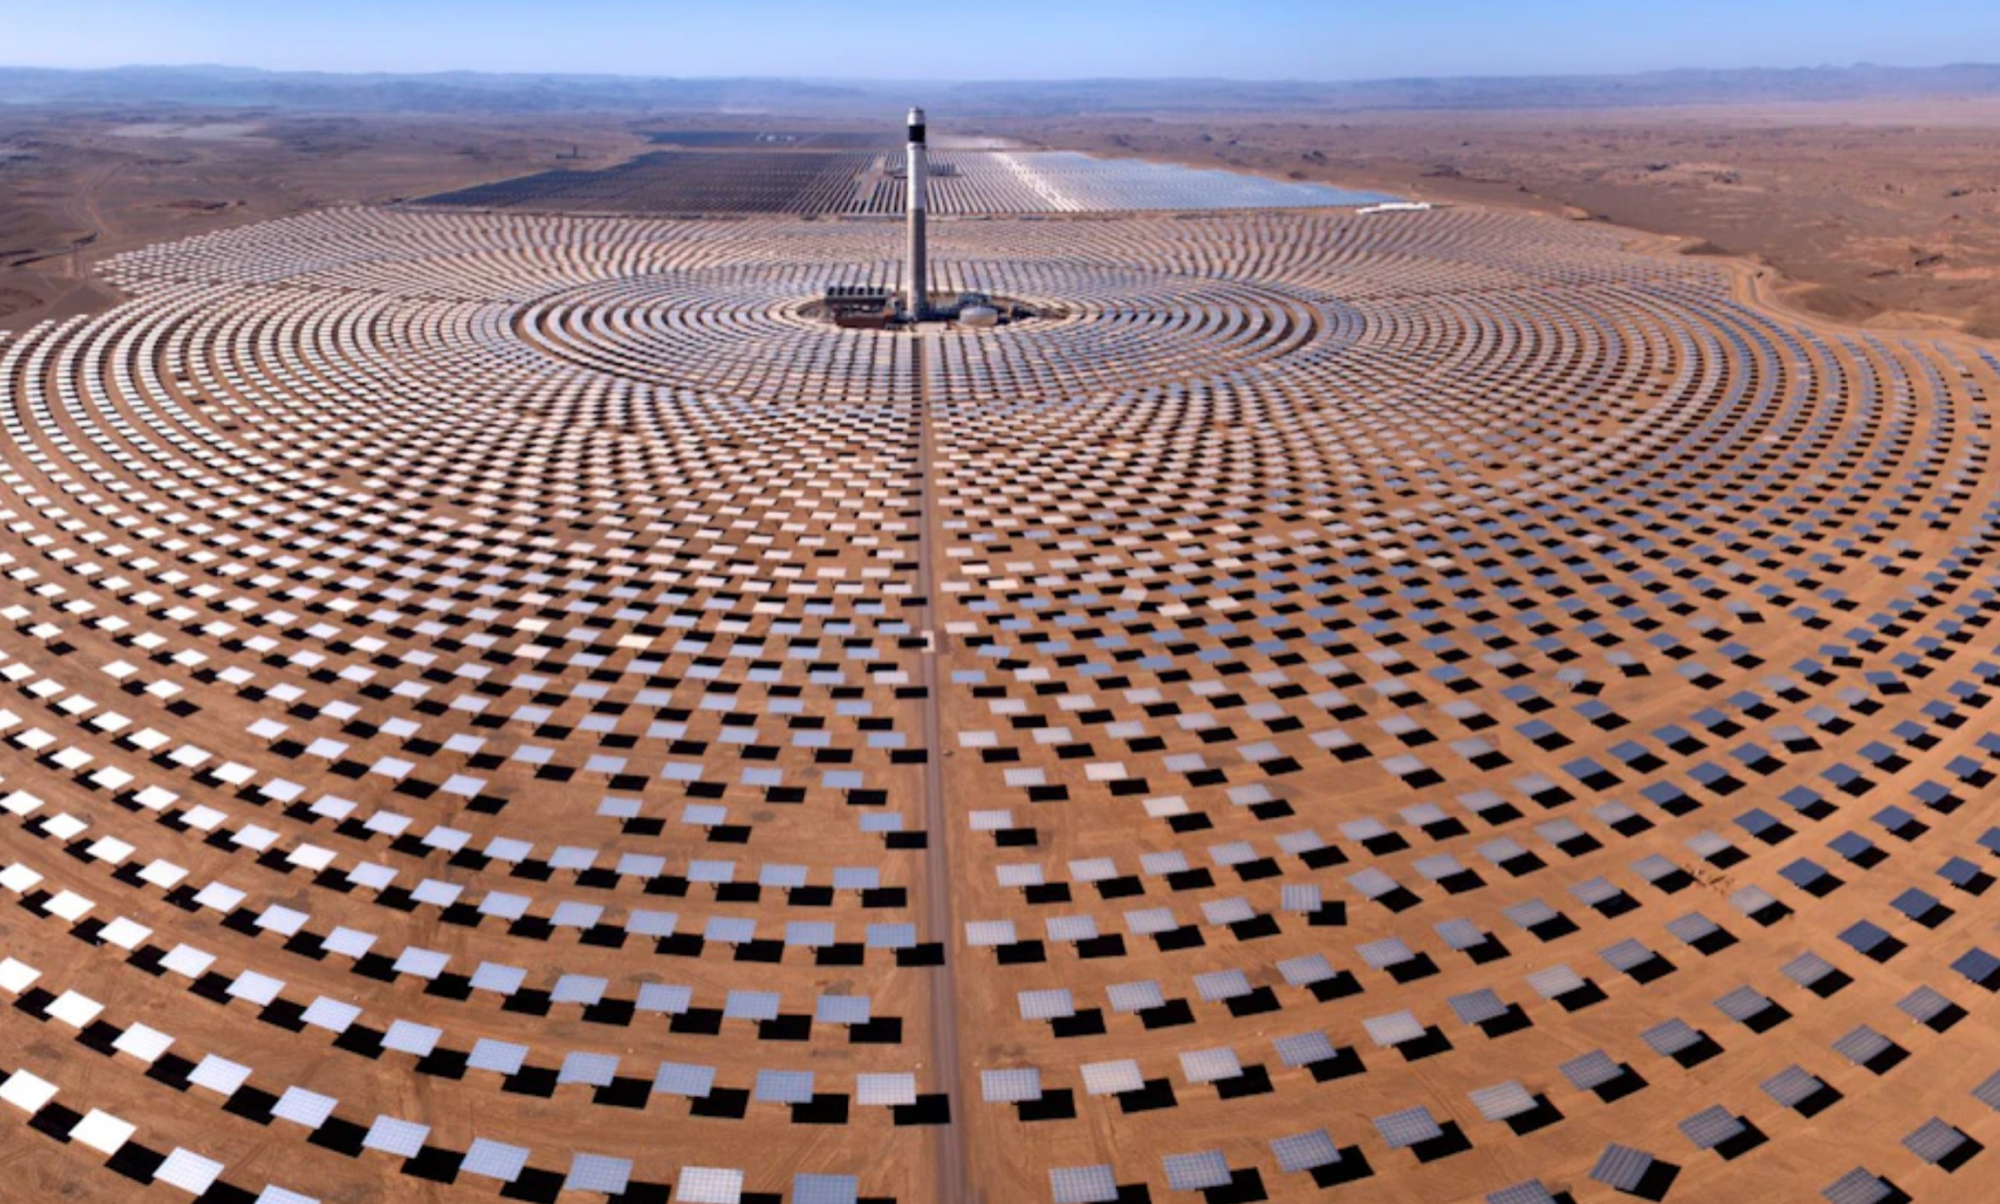 Xander Kostroma is Helping to Power Morocco with Solar Energy